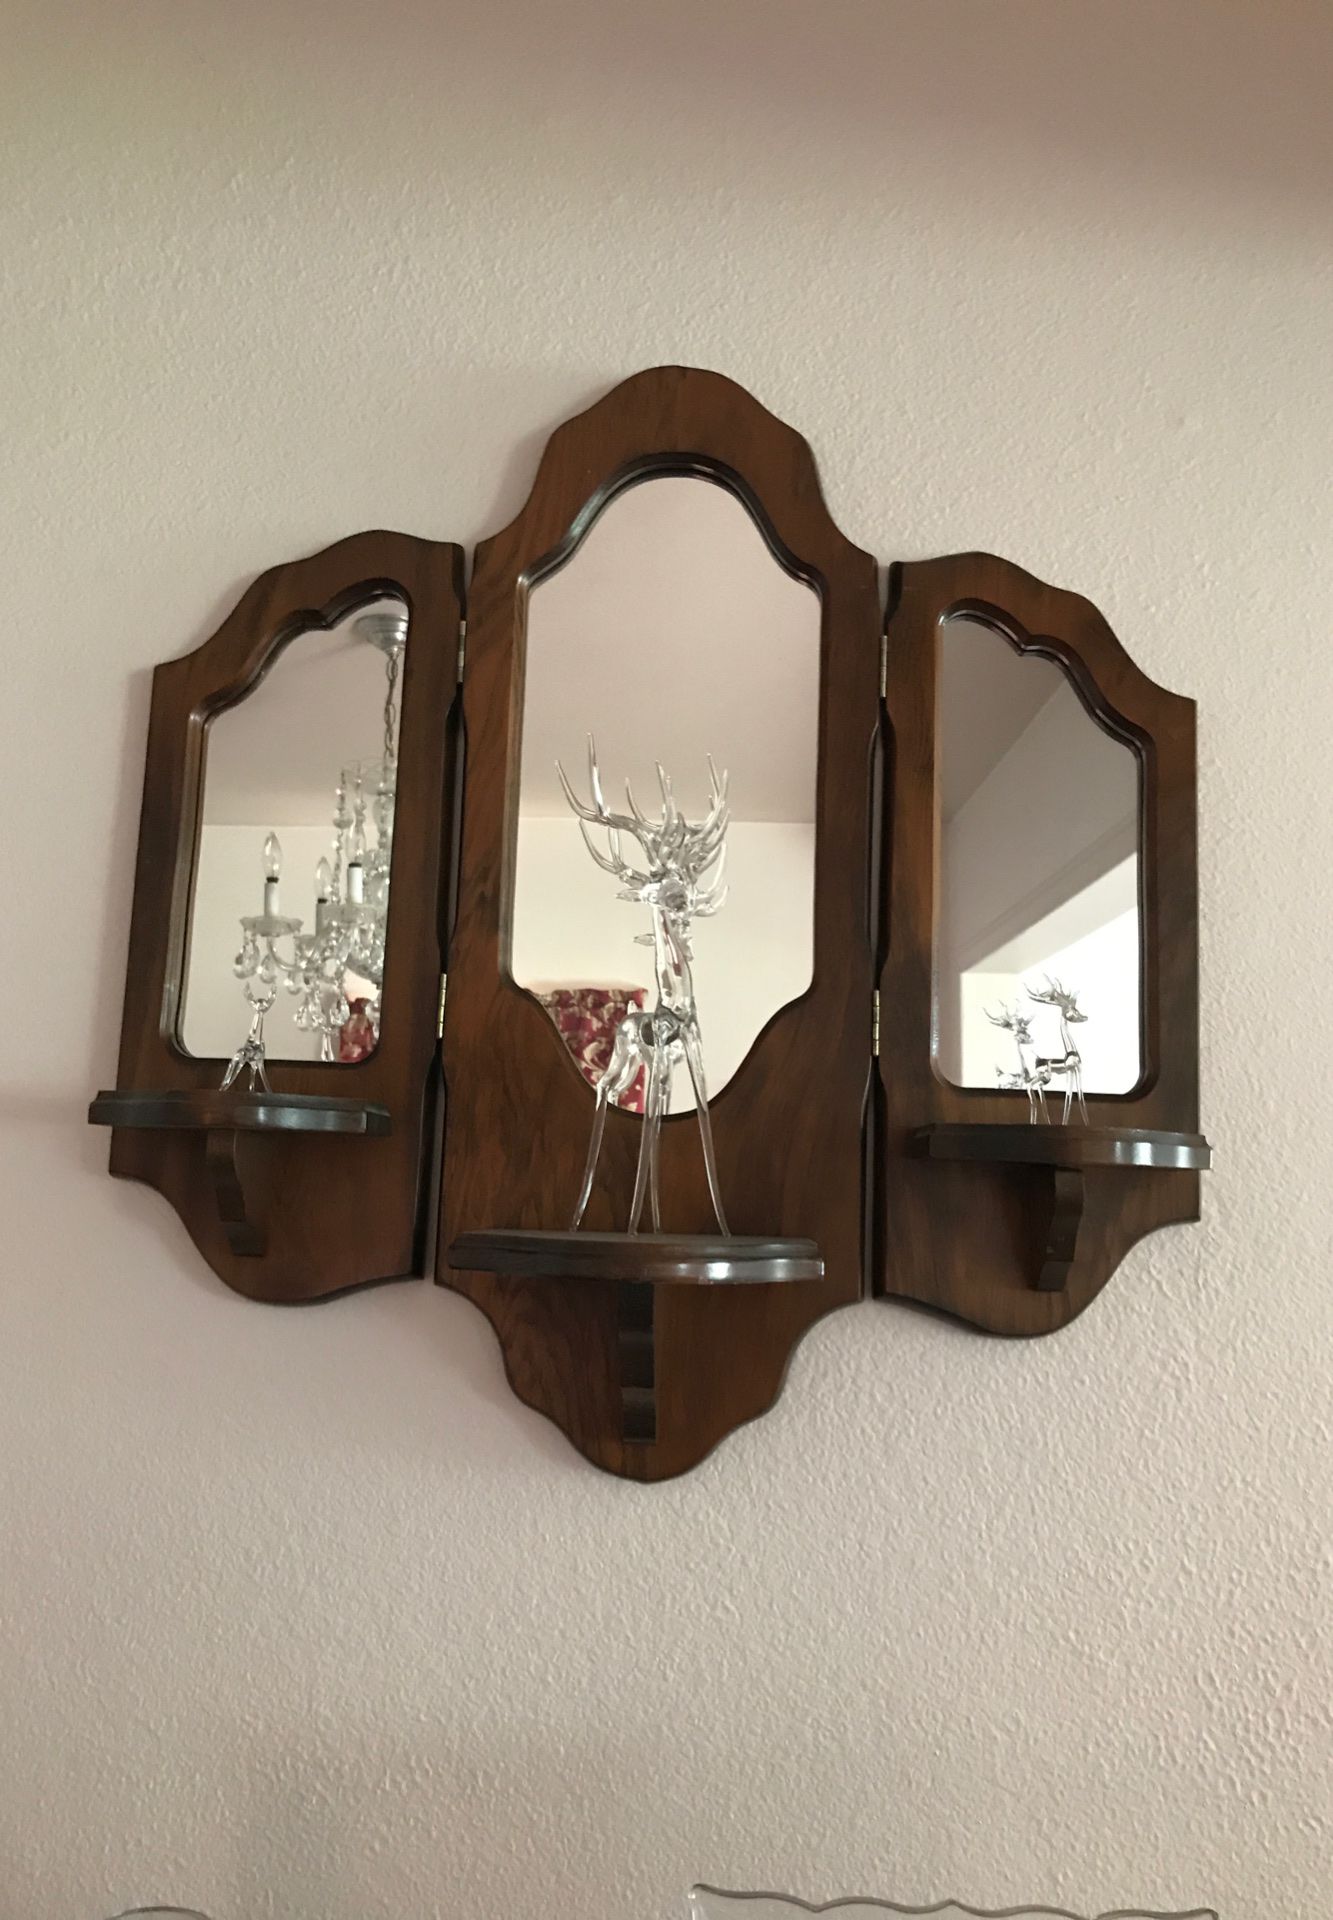 Wood wall frame with three mirrors